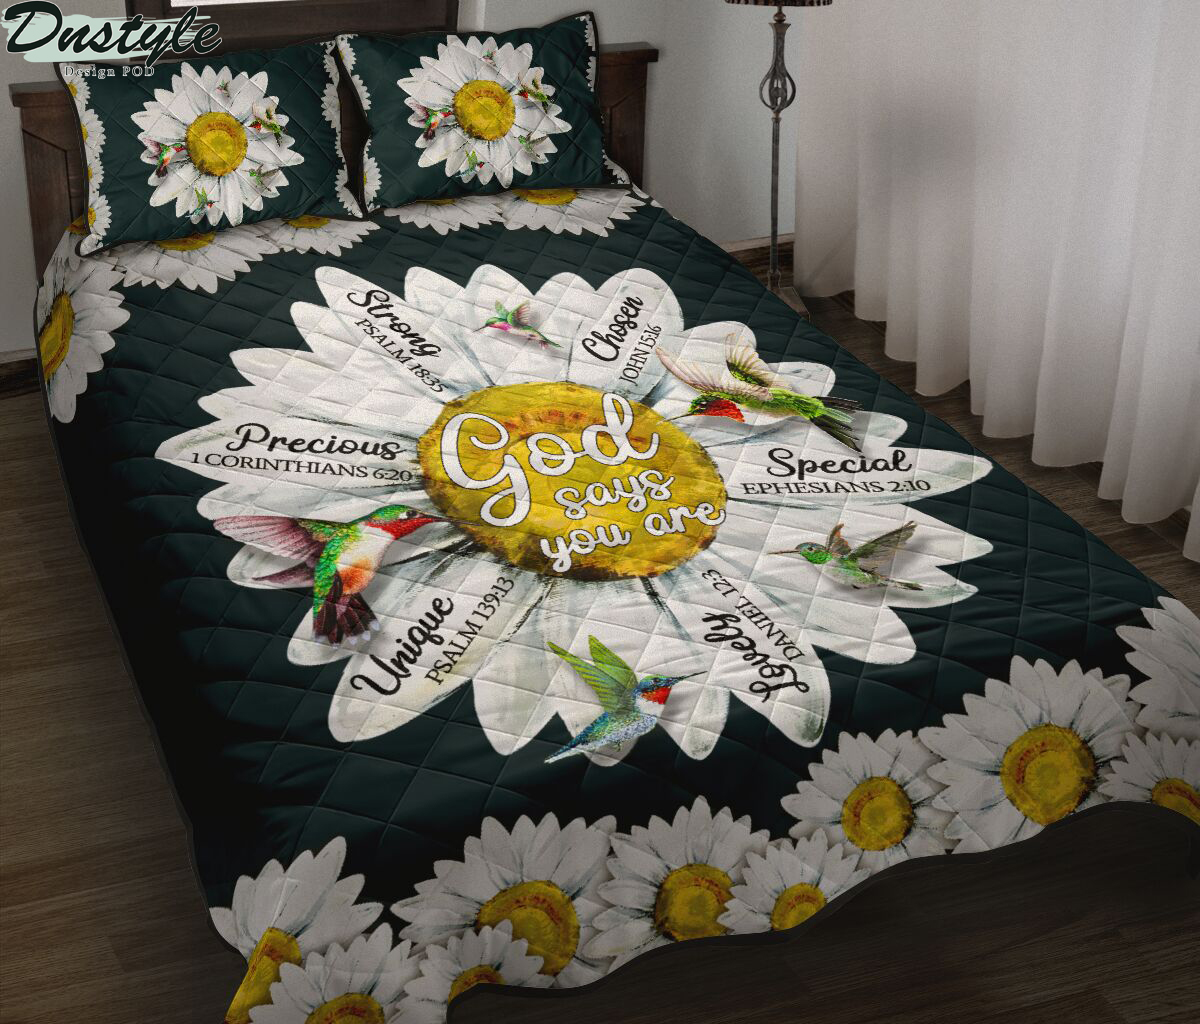 Hummingbird daisy god says you are quilt bed set